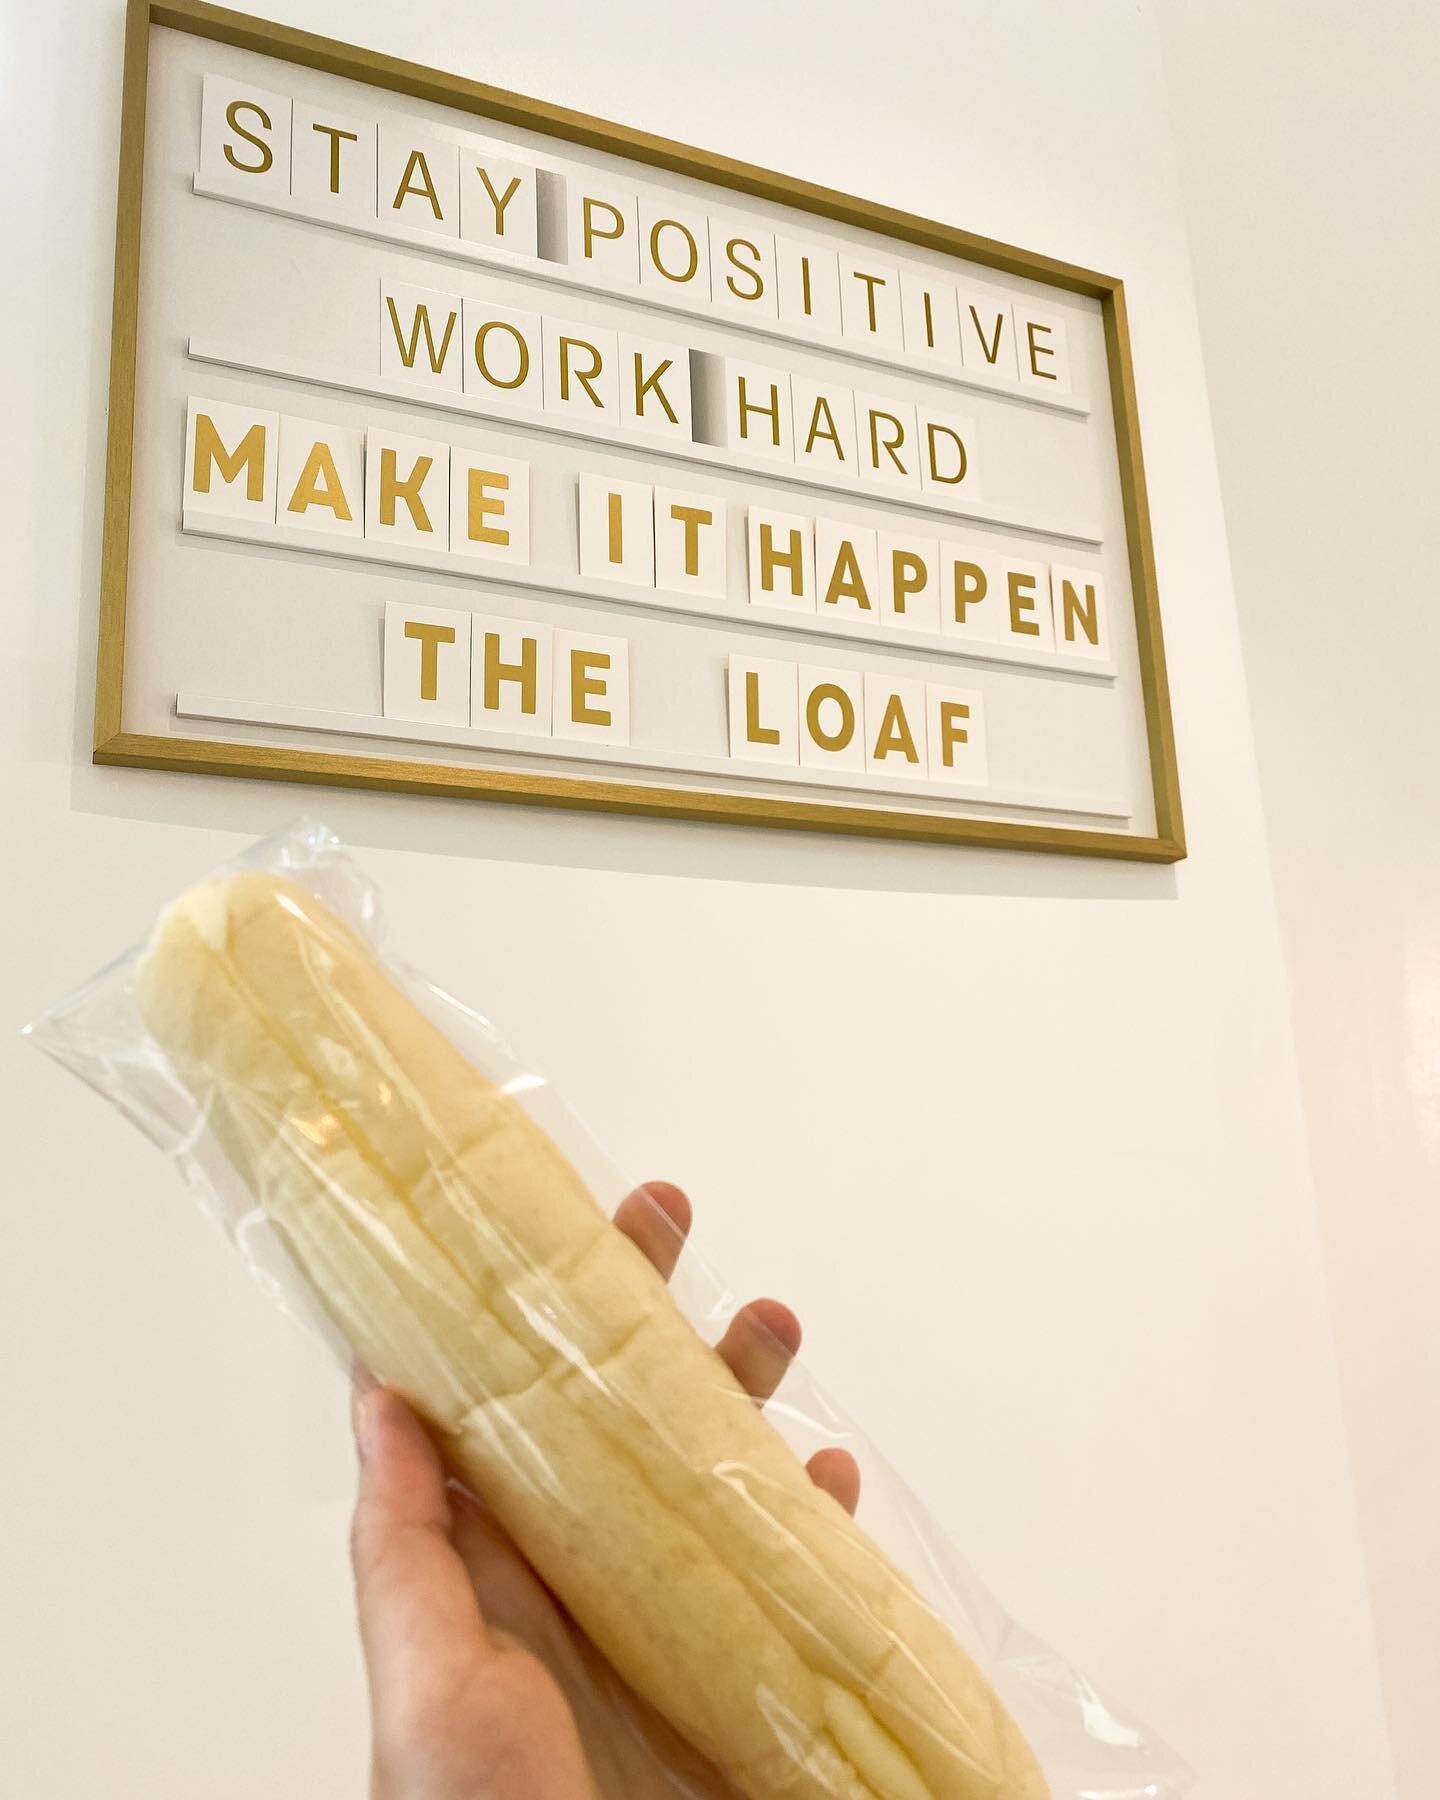 &ldquo;Stay positive. Work hard. Make it happen.&rdquo; - The Loaf 🍞 
We are here with you! We hope that whenever you stop by we are able to brighten up your day just a little bit whether it is from the bread itself or our services. Thank you all so